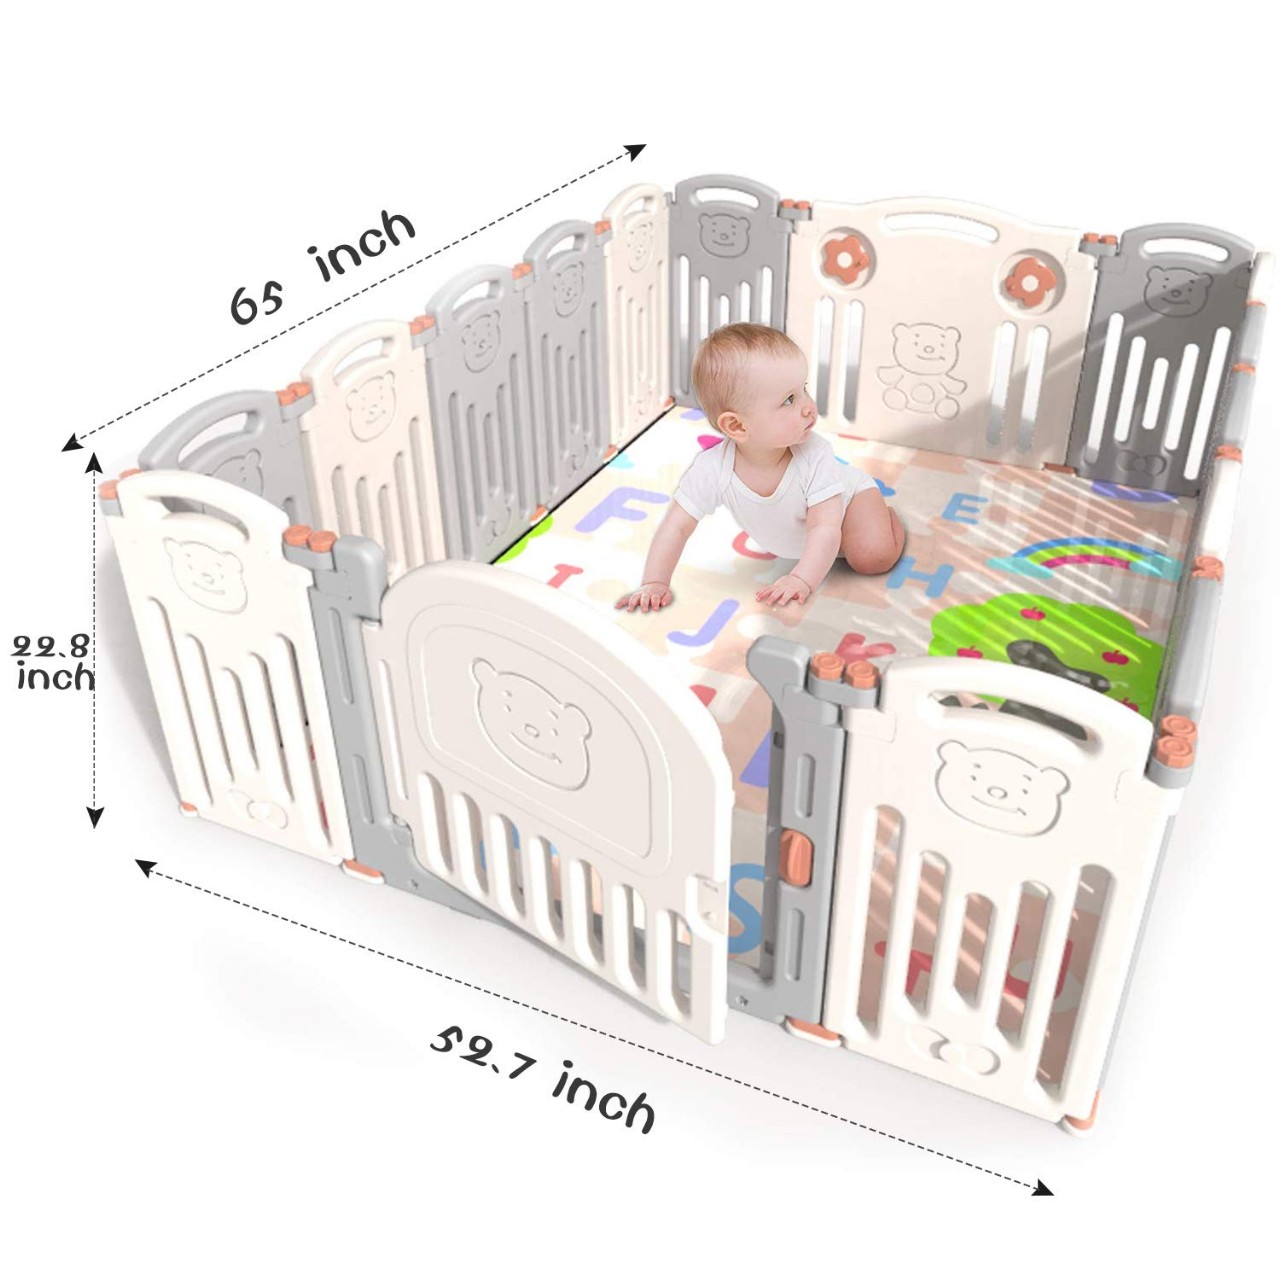 Baby 16 Panel Playpen Activity Centre Safety Play Yard Foldable Portable HDPE Indoor Outdoor Playard